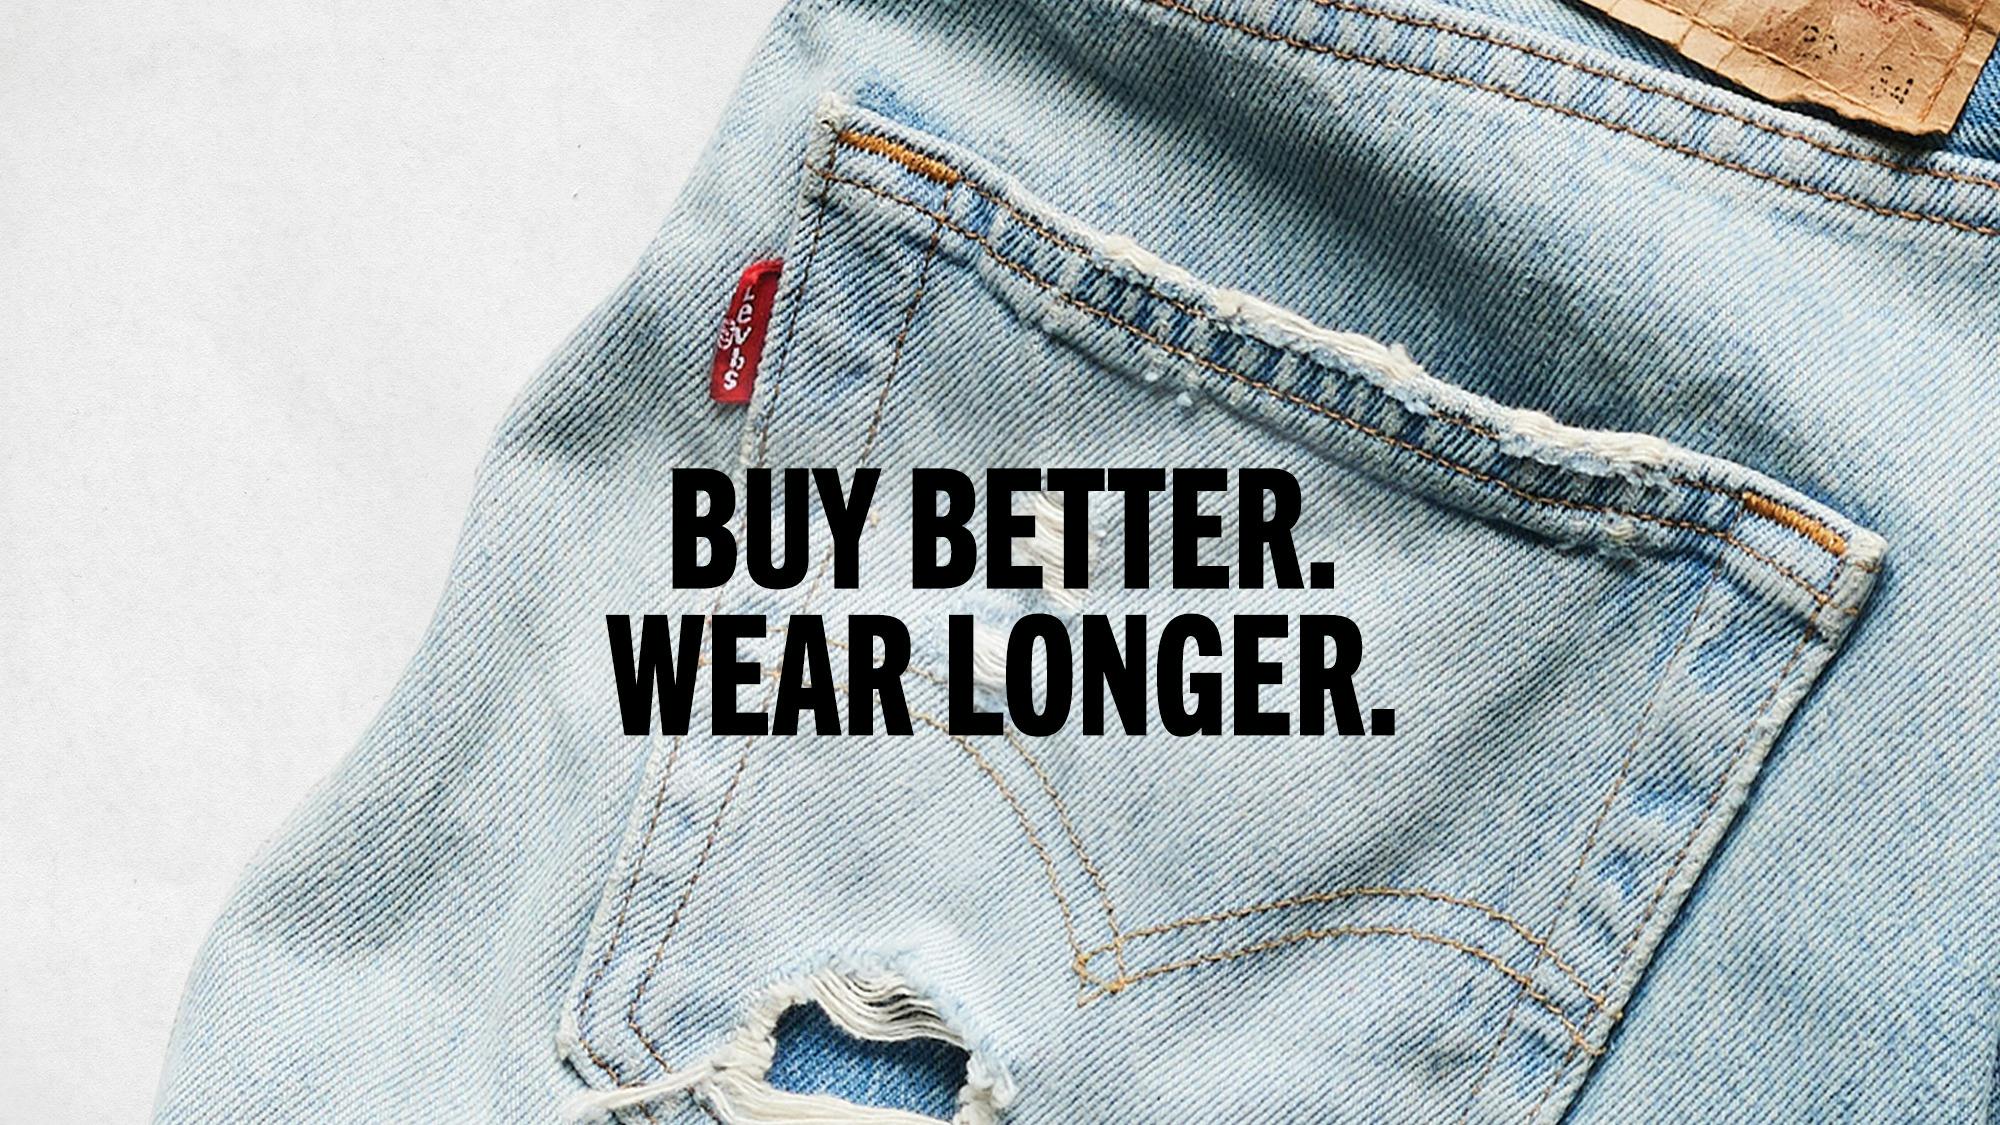 Levi's Launches 'Buy Better, Wear Longer' Sustainability Campaign